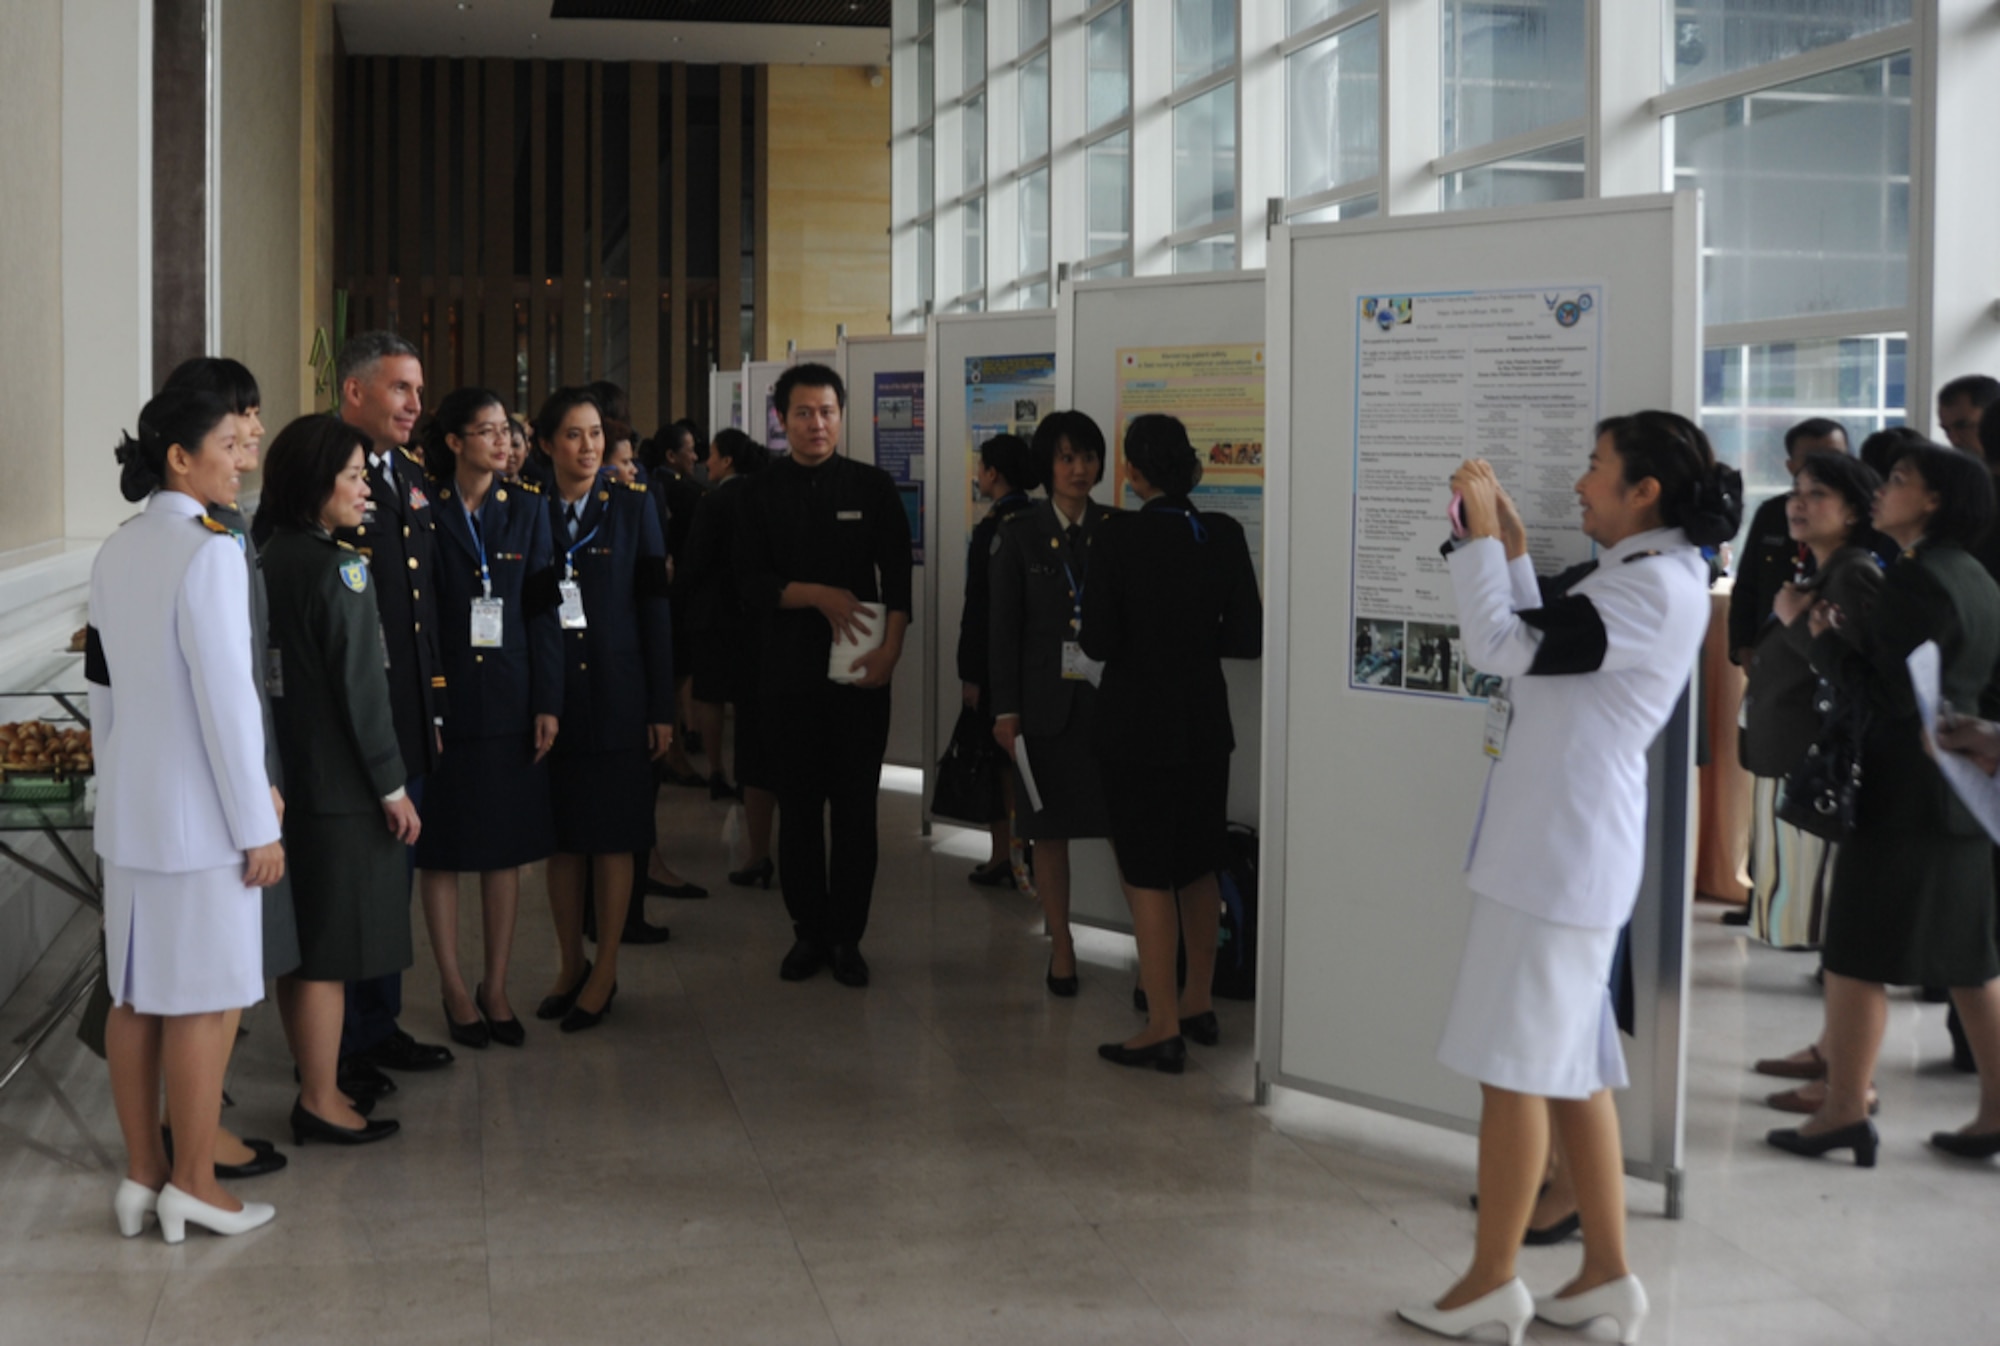 BANGKOK, Thailand - Members of the military nursing community take photos with one another at the Pullman King Power Hotel in Bangkok Thailand on Aug. 1 during the start of a five-day 2011 Asia Pacific Military Nursing Symposium, which is sponsored by Pacific Command and executed under the direction of 13th Air Force.
This is the fifth year of the symposium, which started at Hickam Air force Base in 2007, and the first time that Thailand has hosted the event.
More than 12 countries from the Asia-Pacific region have come together to build on relationships by exchanging information and techniques with one another. 
(U.S.  Air Force photo/Master Sgt. Cohen A. Young)
